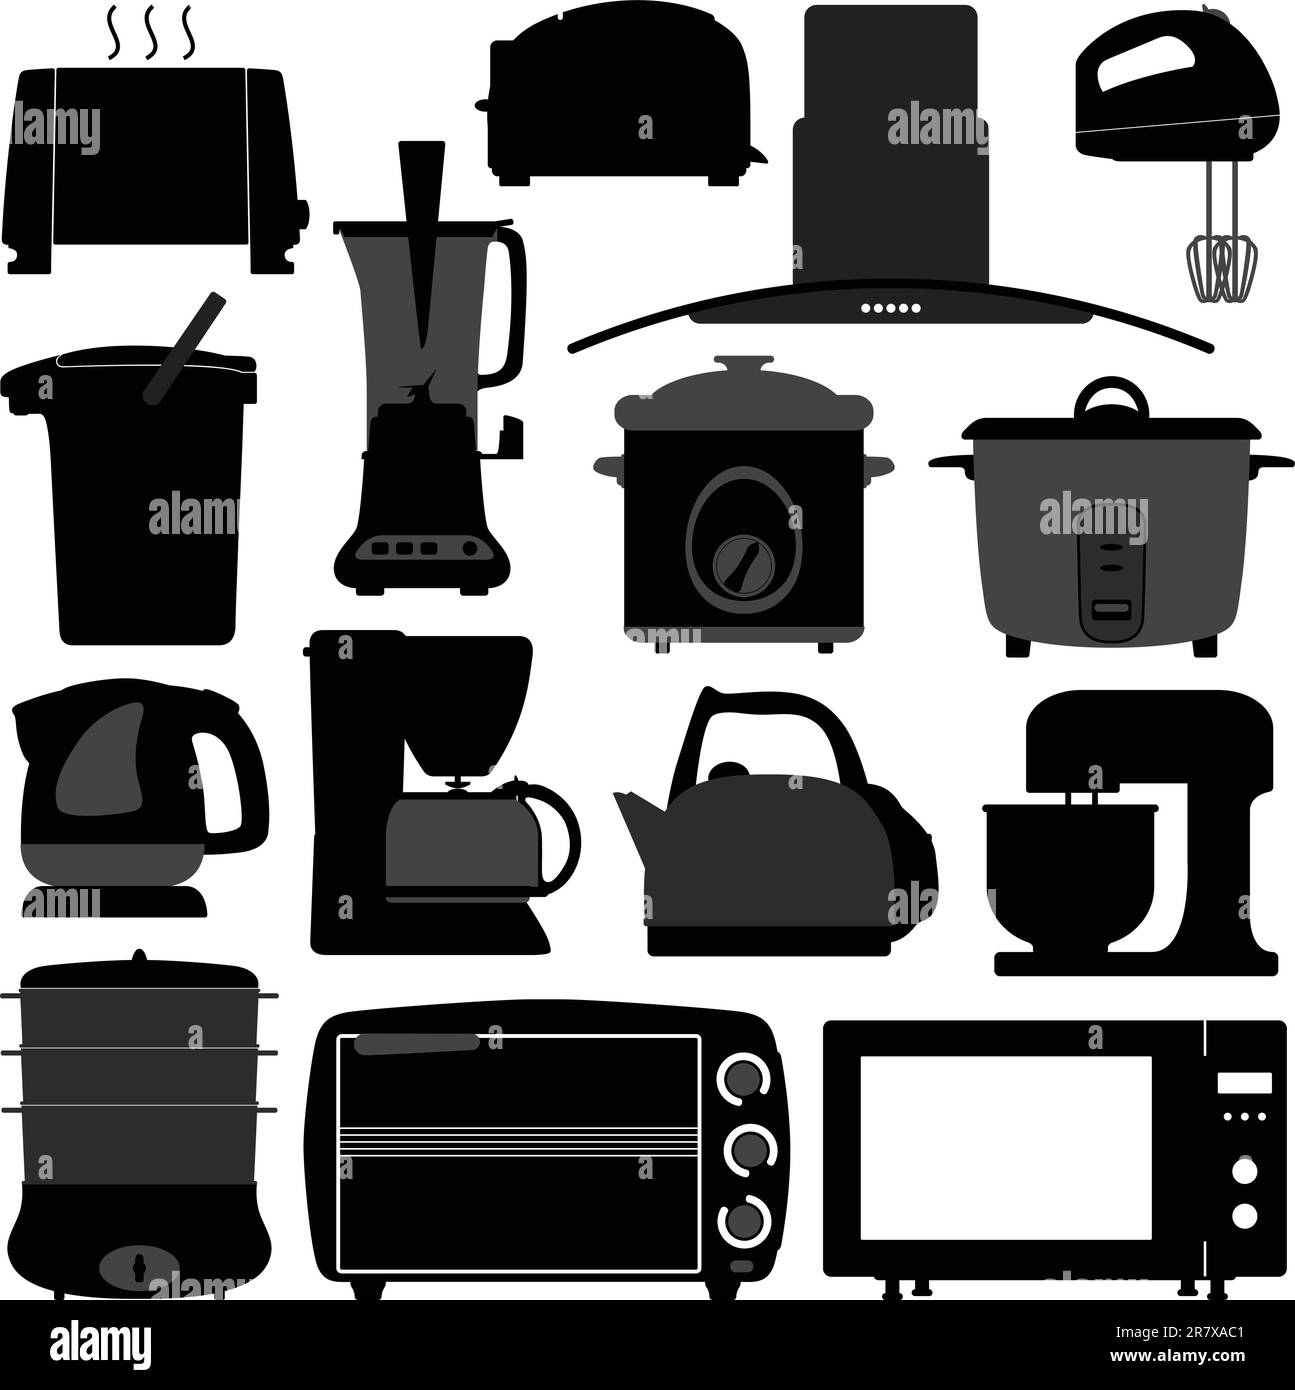 A set of electronic kitchen appliances in detail silhouette. Stock Vector